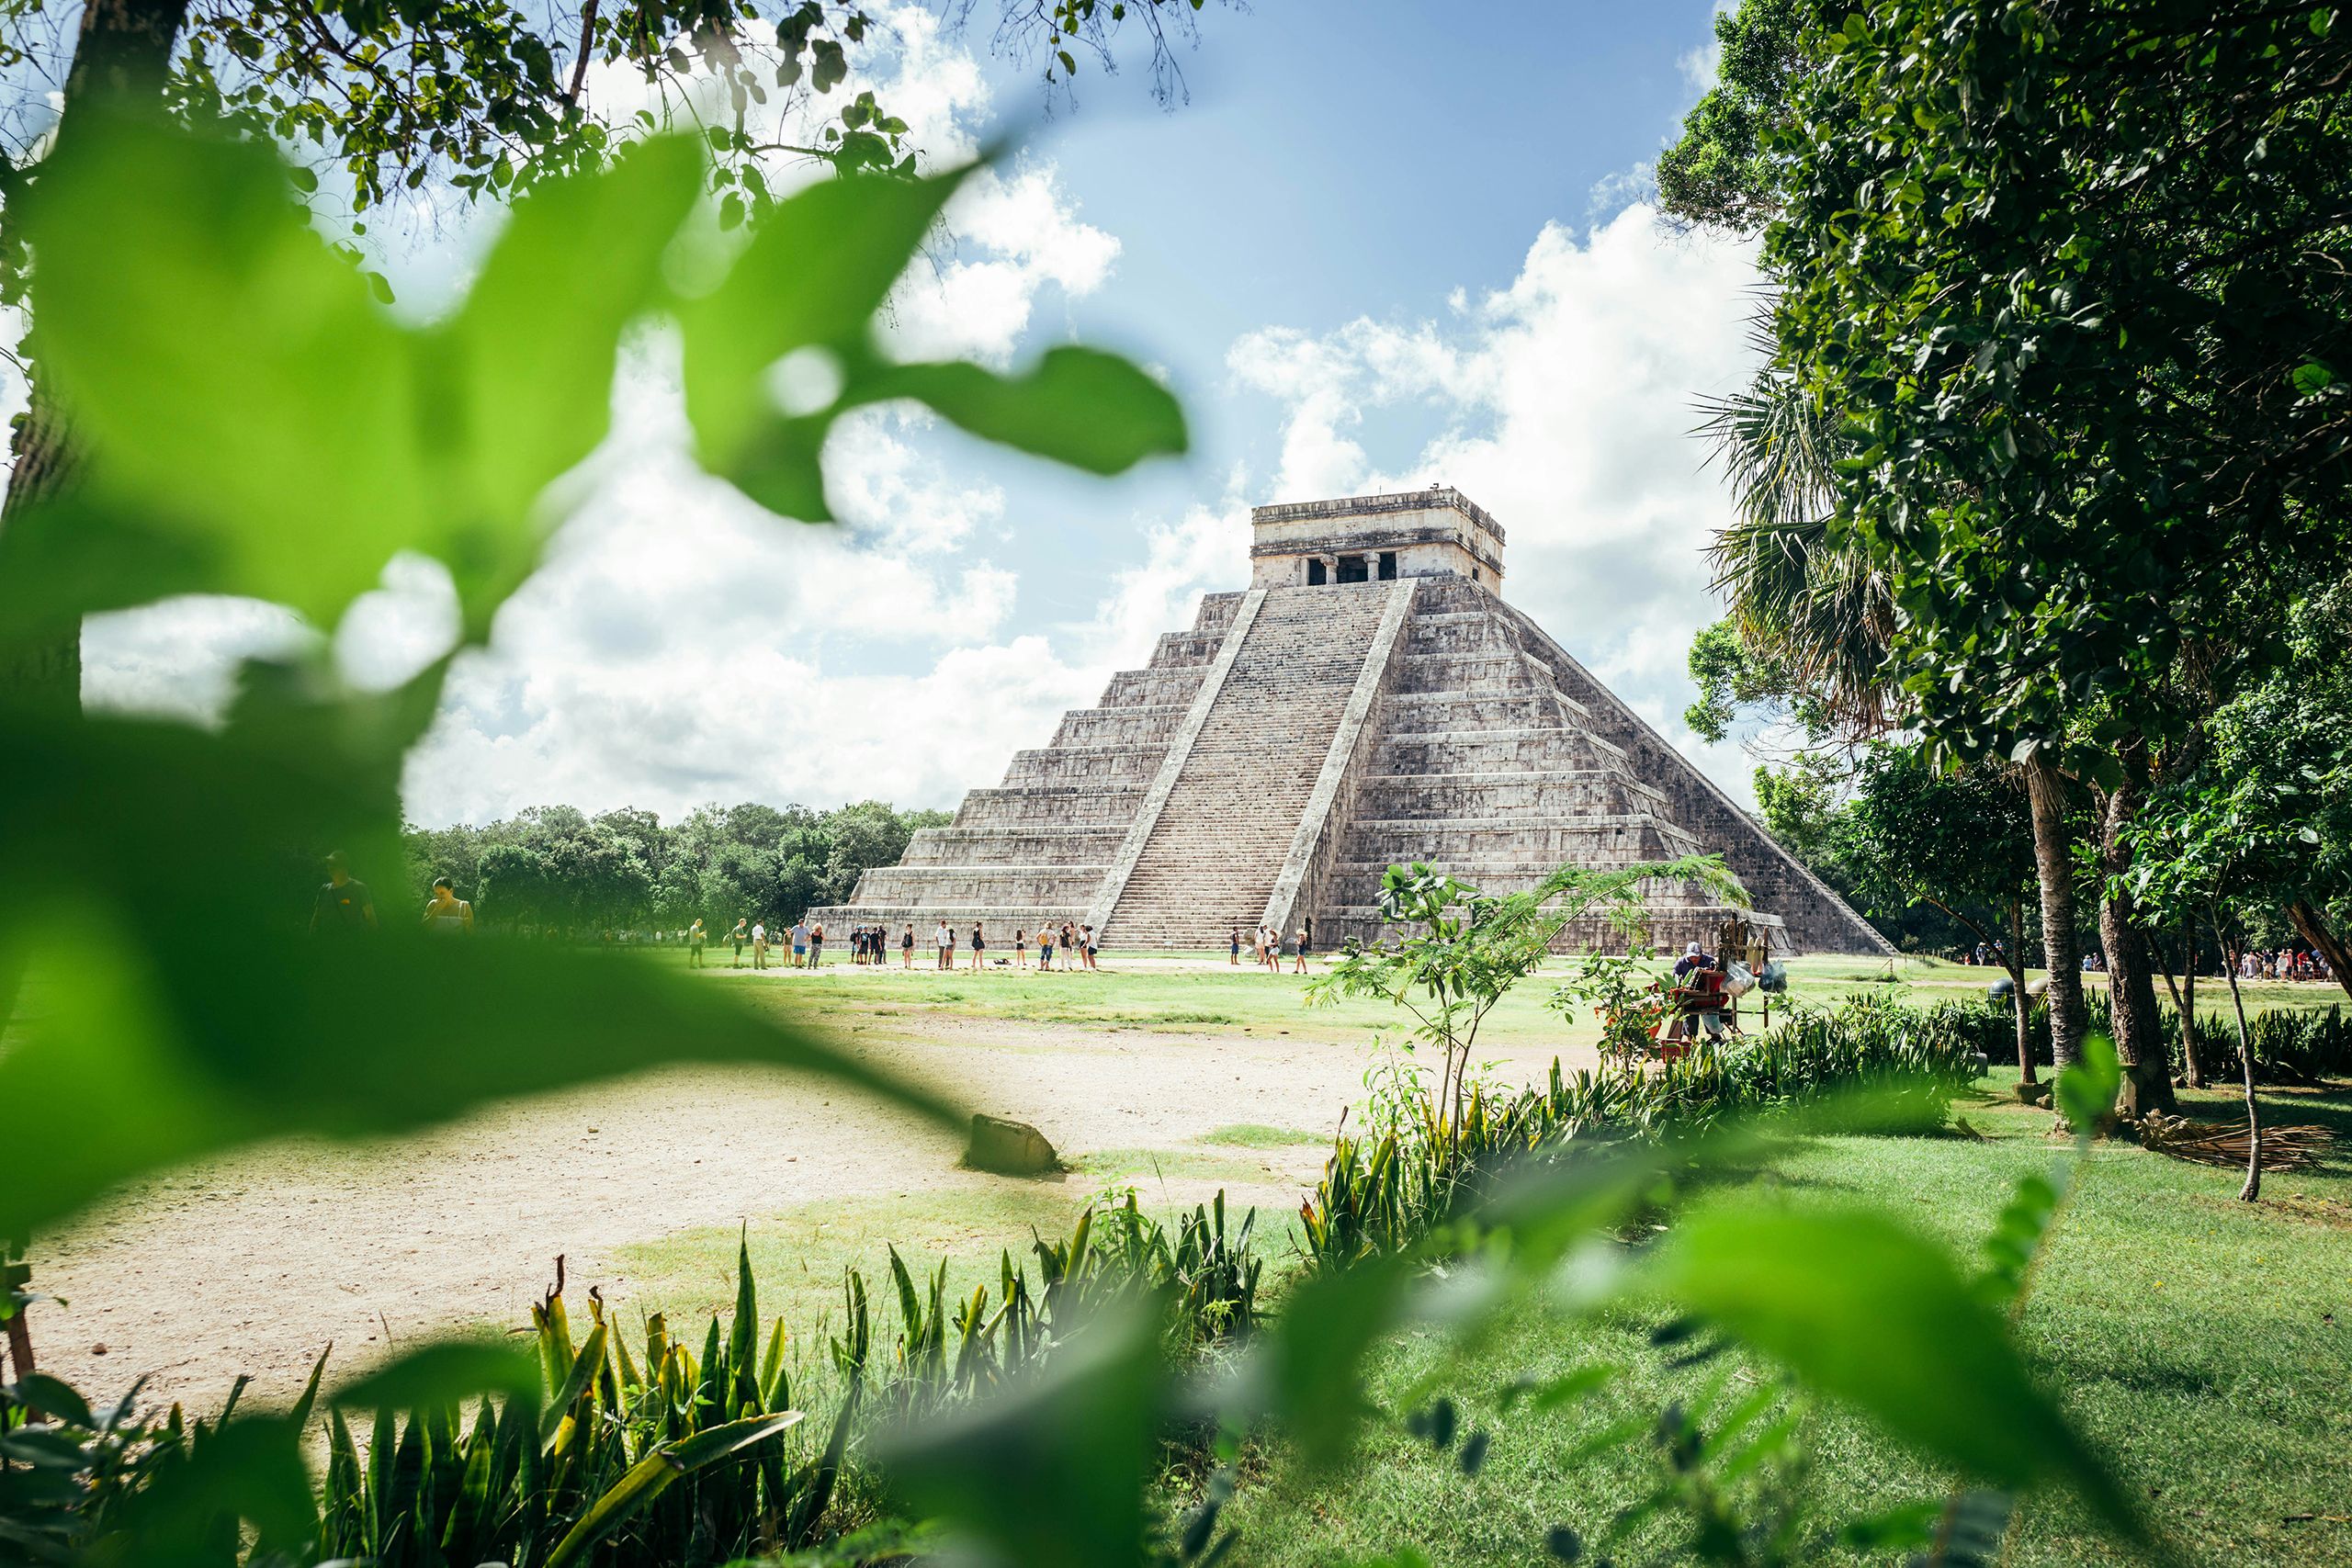 Chichén-Itzá | ucatan state of Mexico and a UNESCO World Heritage Site